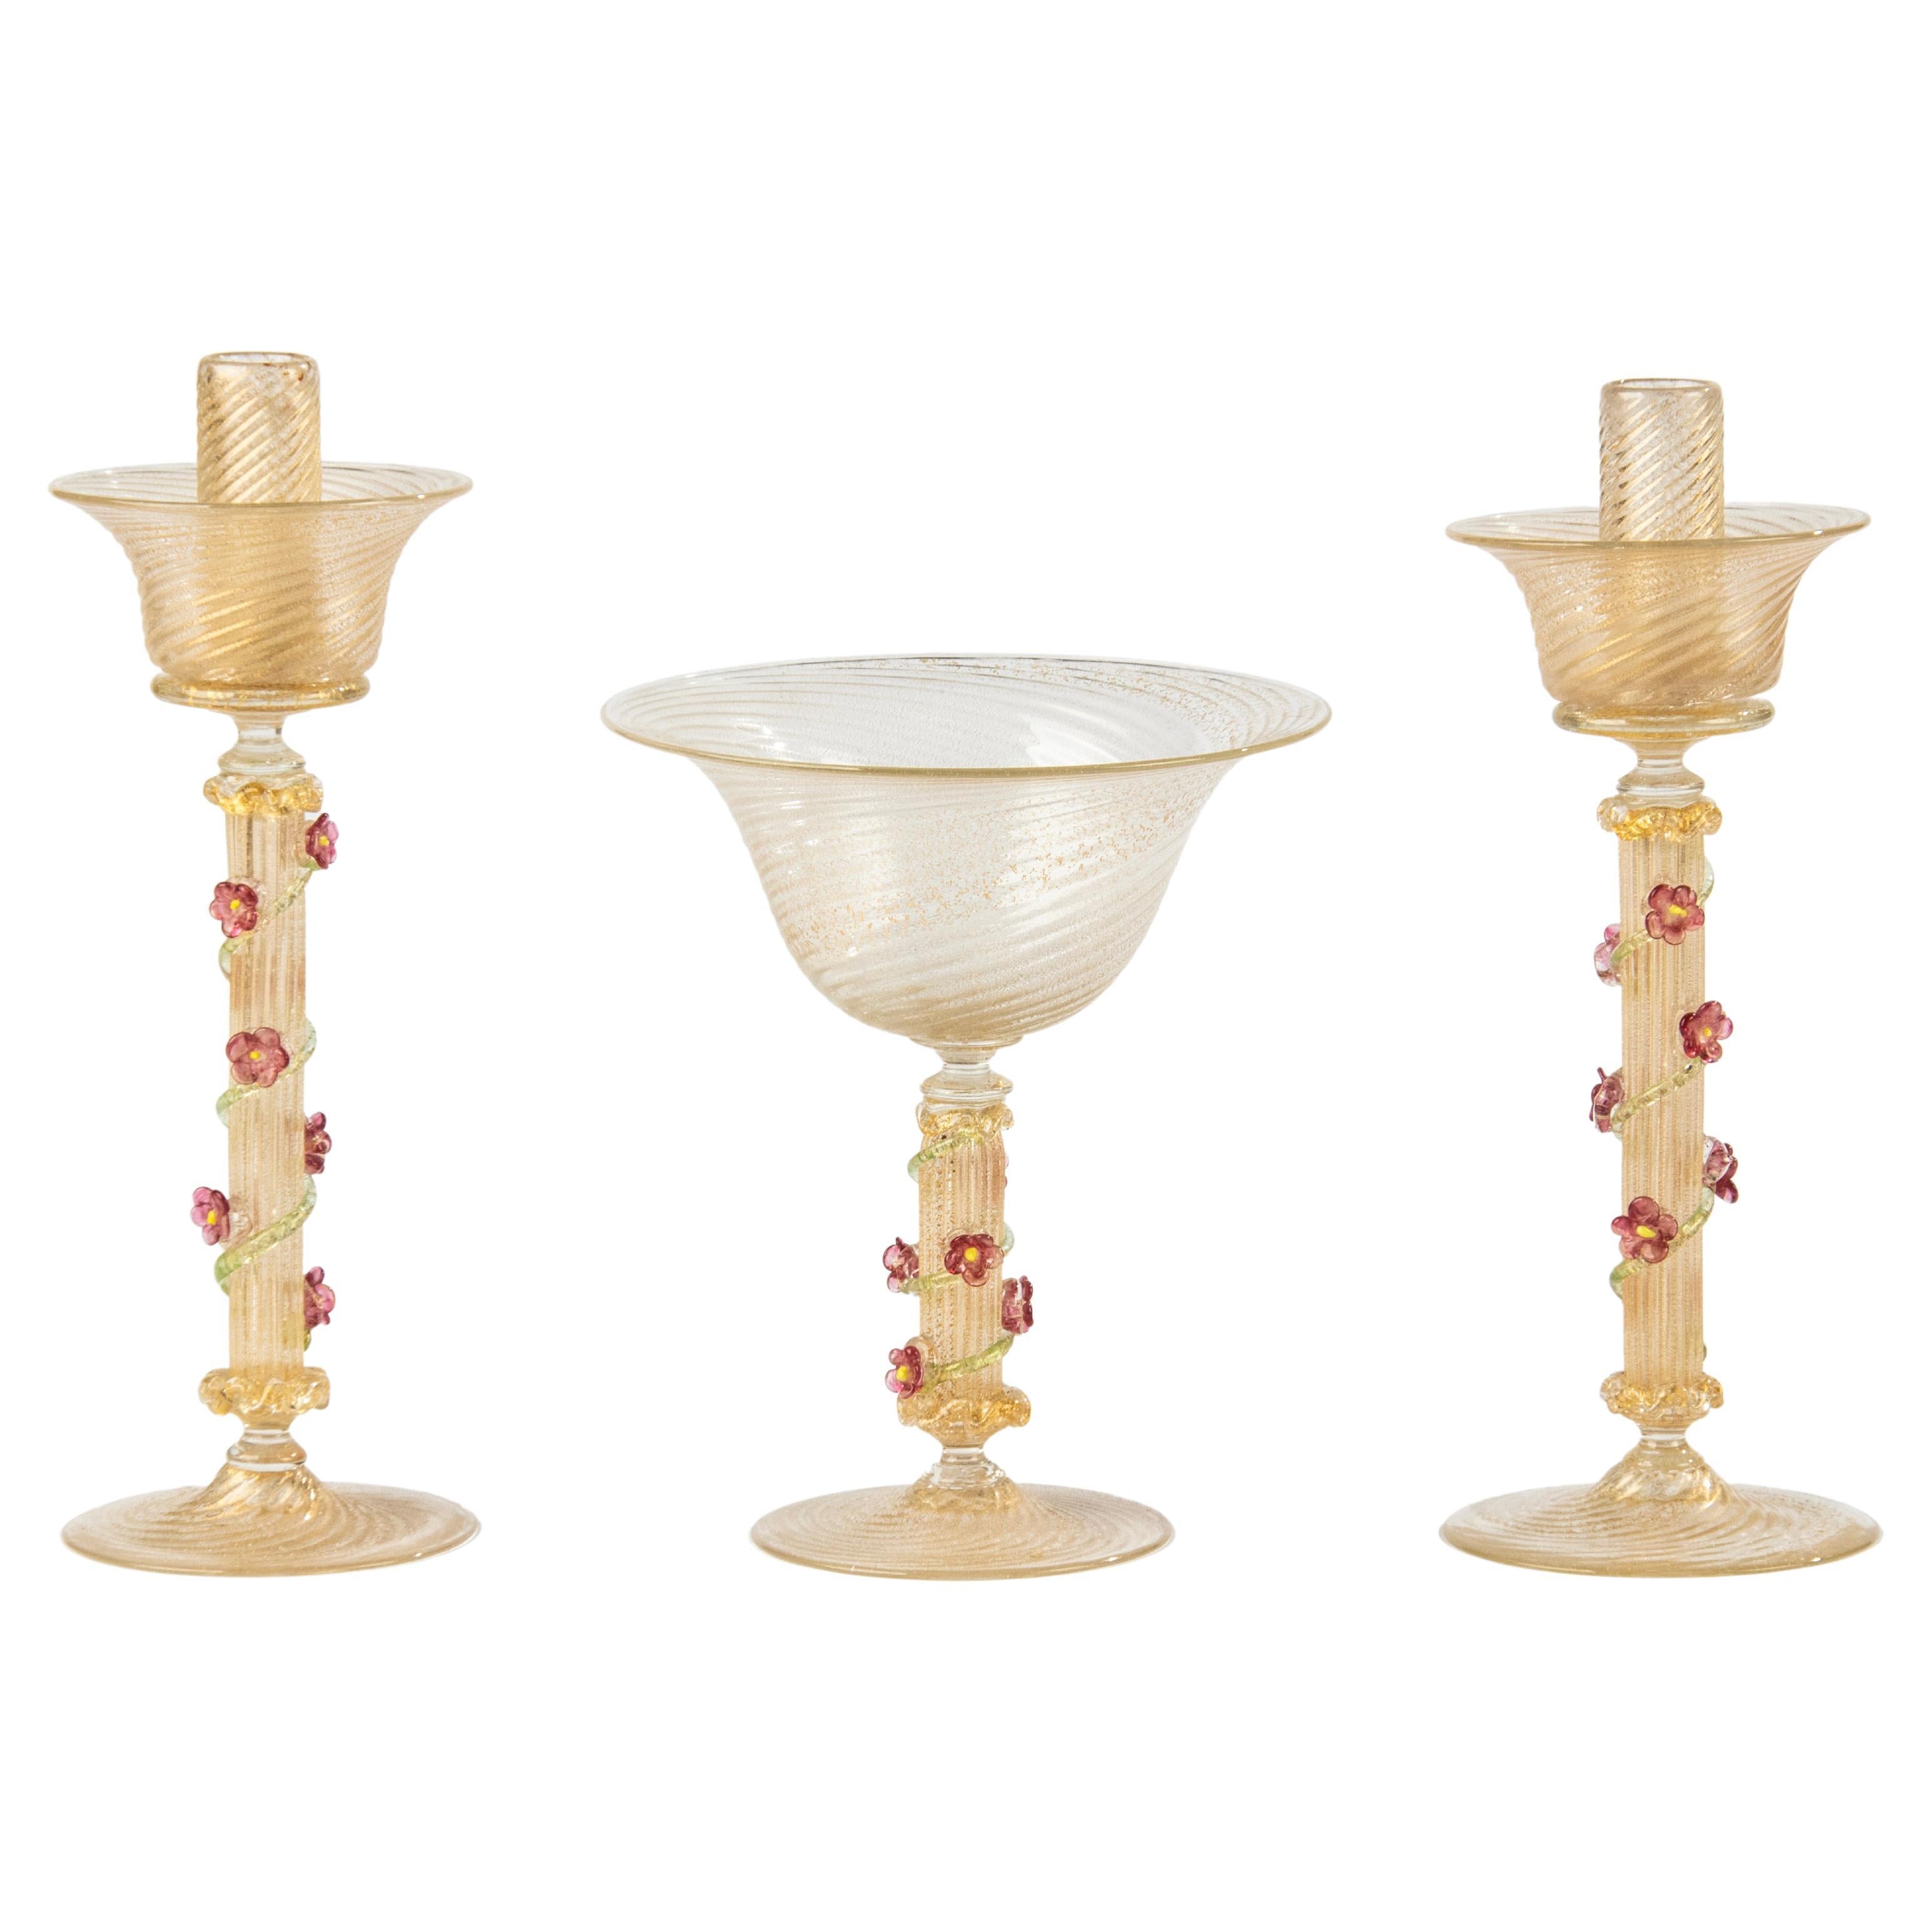 3-Piece Set of Murano Glass Candles